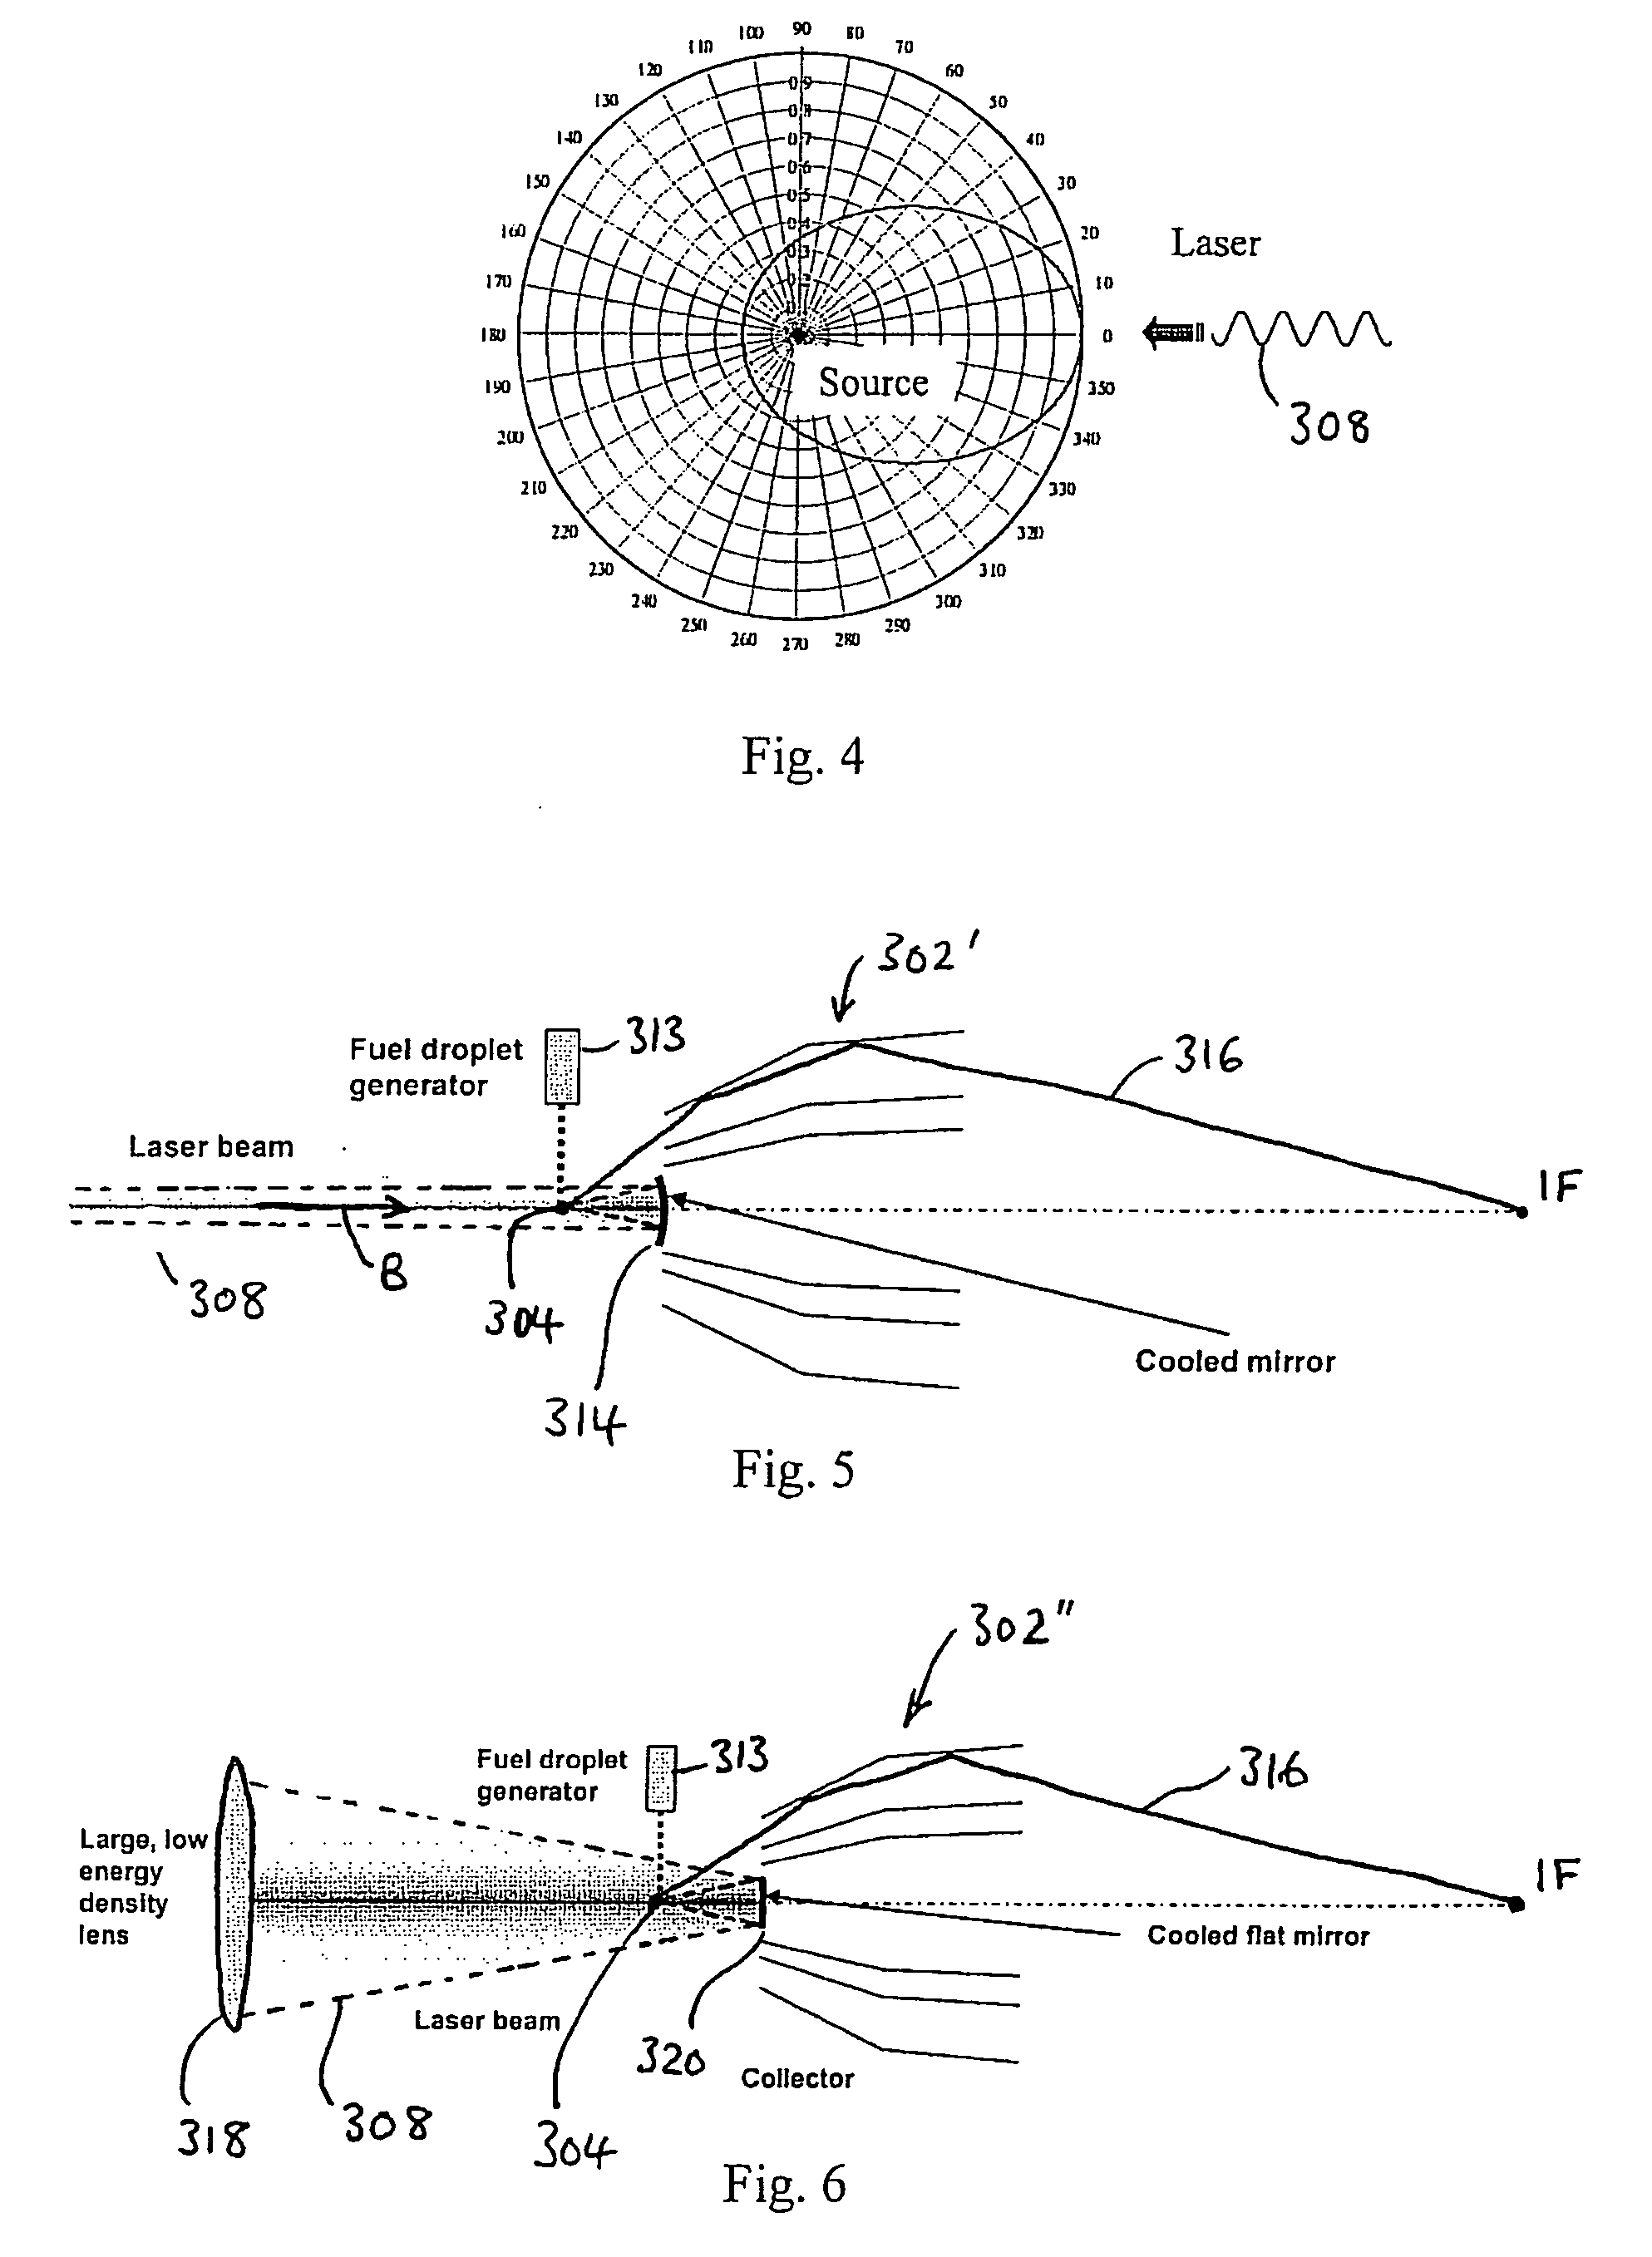 Grazing incidence collector for laser produced plasma sources